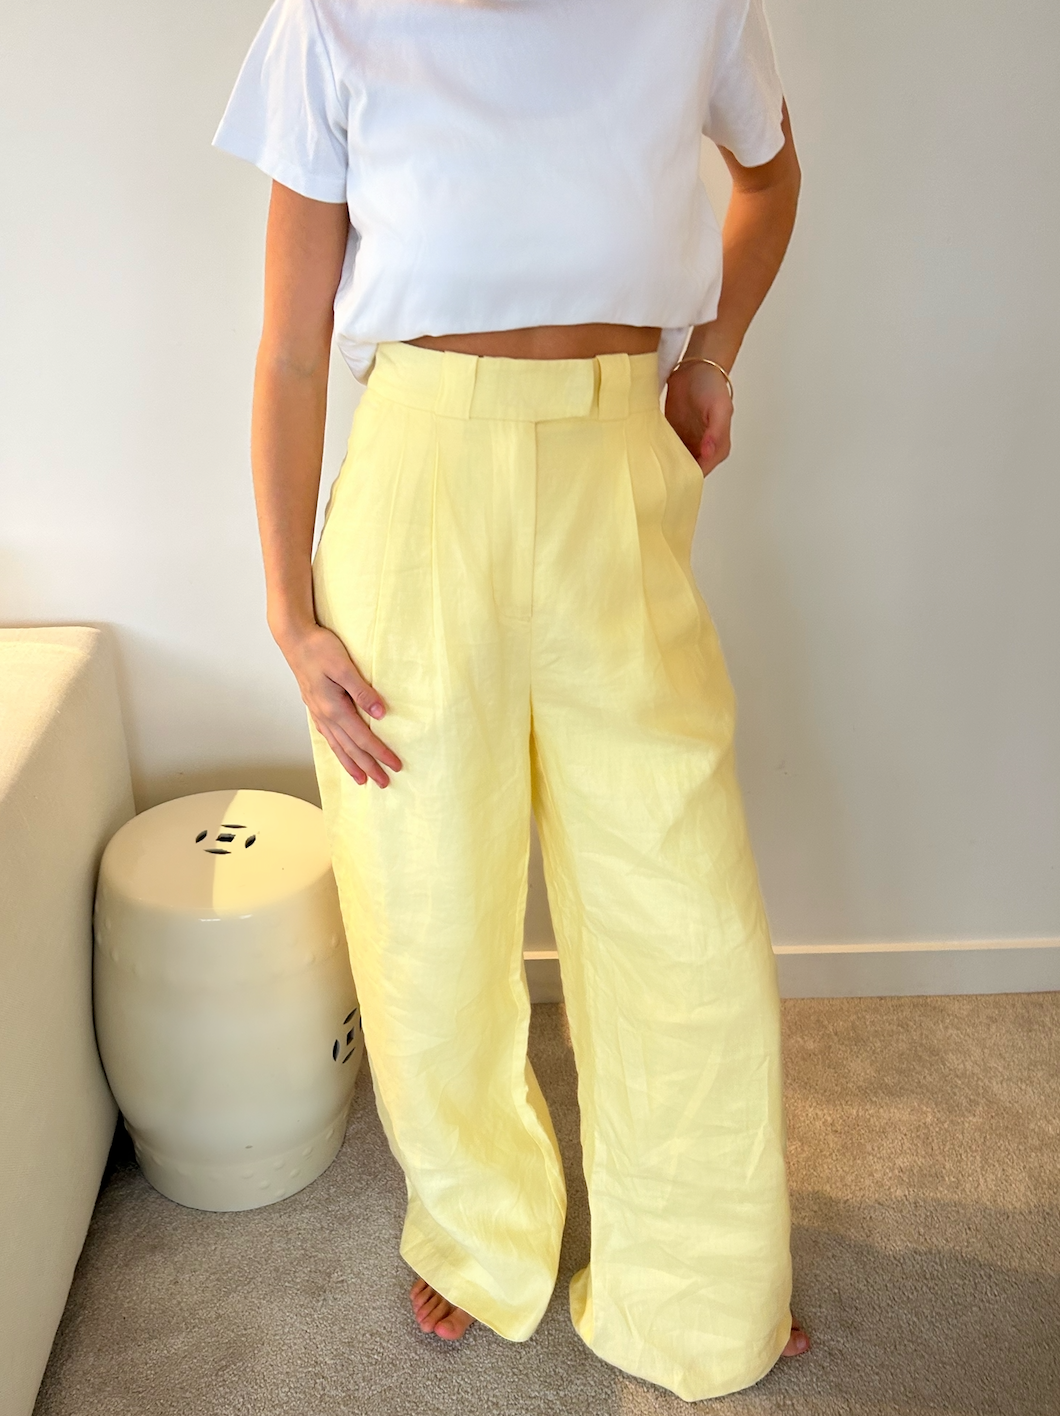 PO - The Greta Pant in White or Butter Yellow